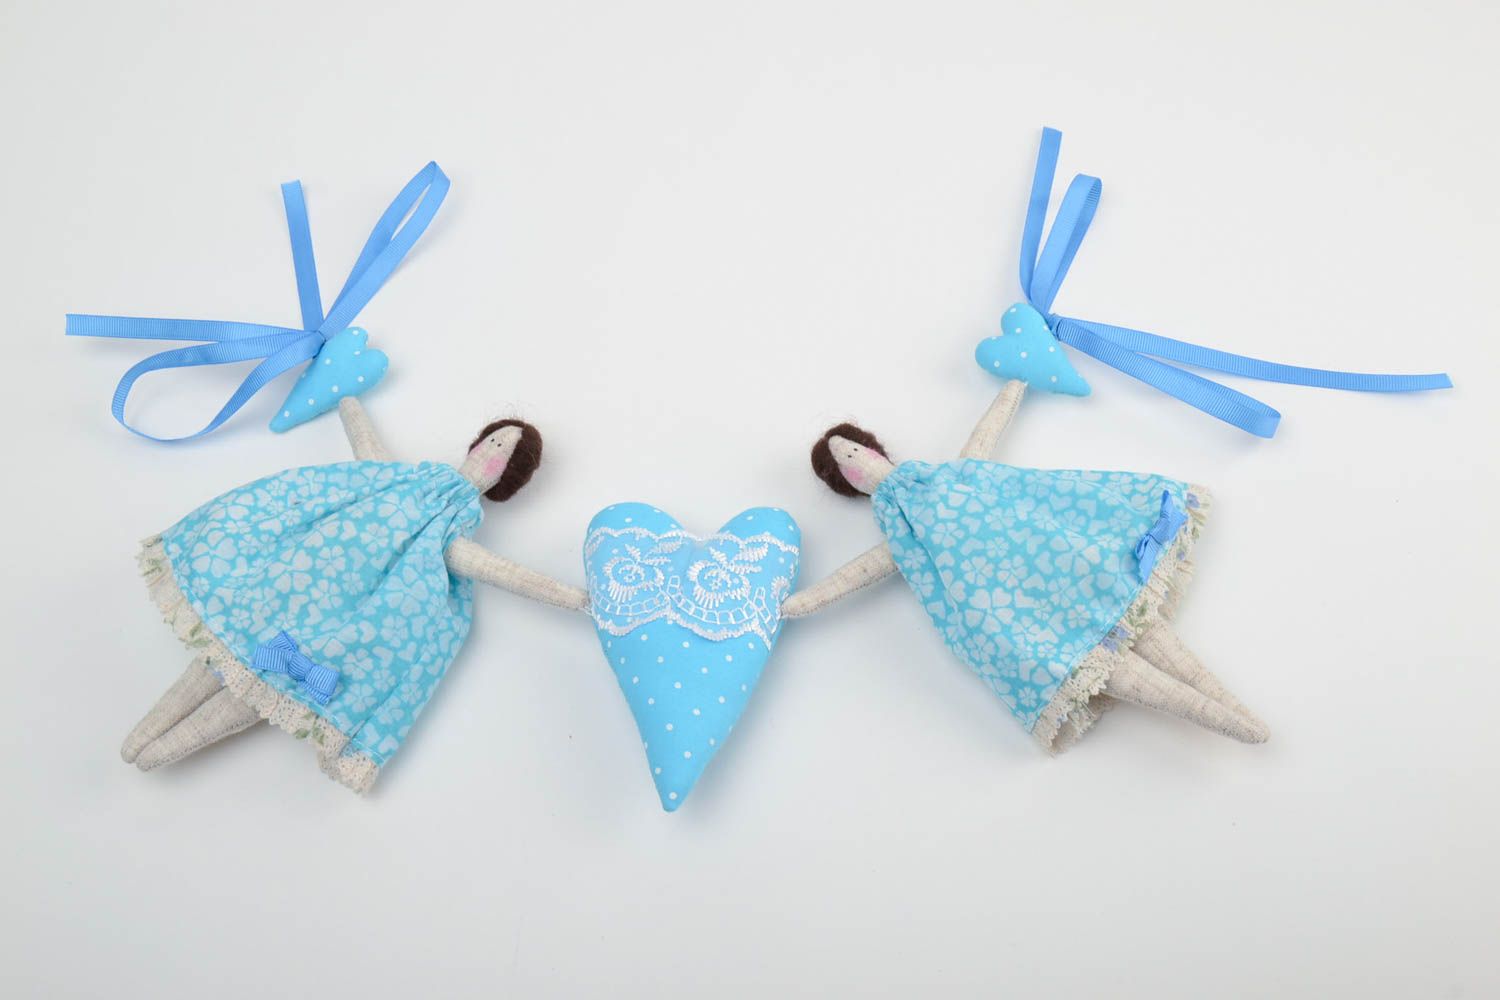 Handmade soft fabric wall hanging soft toy garland in blue color interior decor photo 2